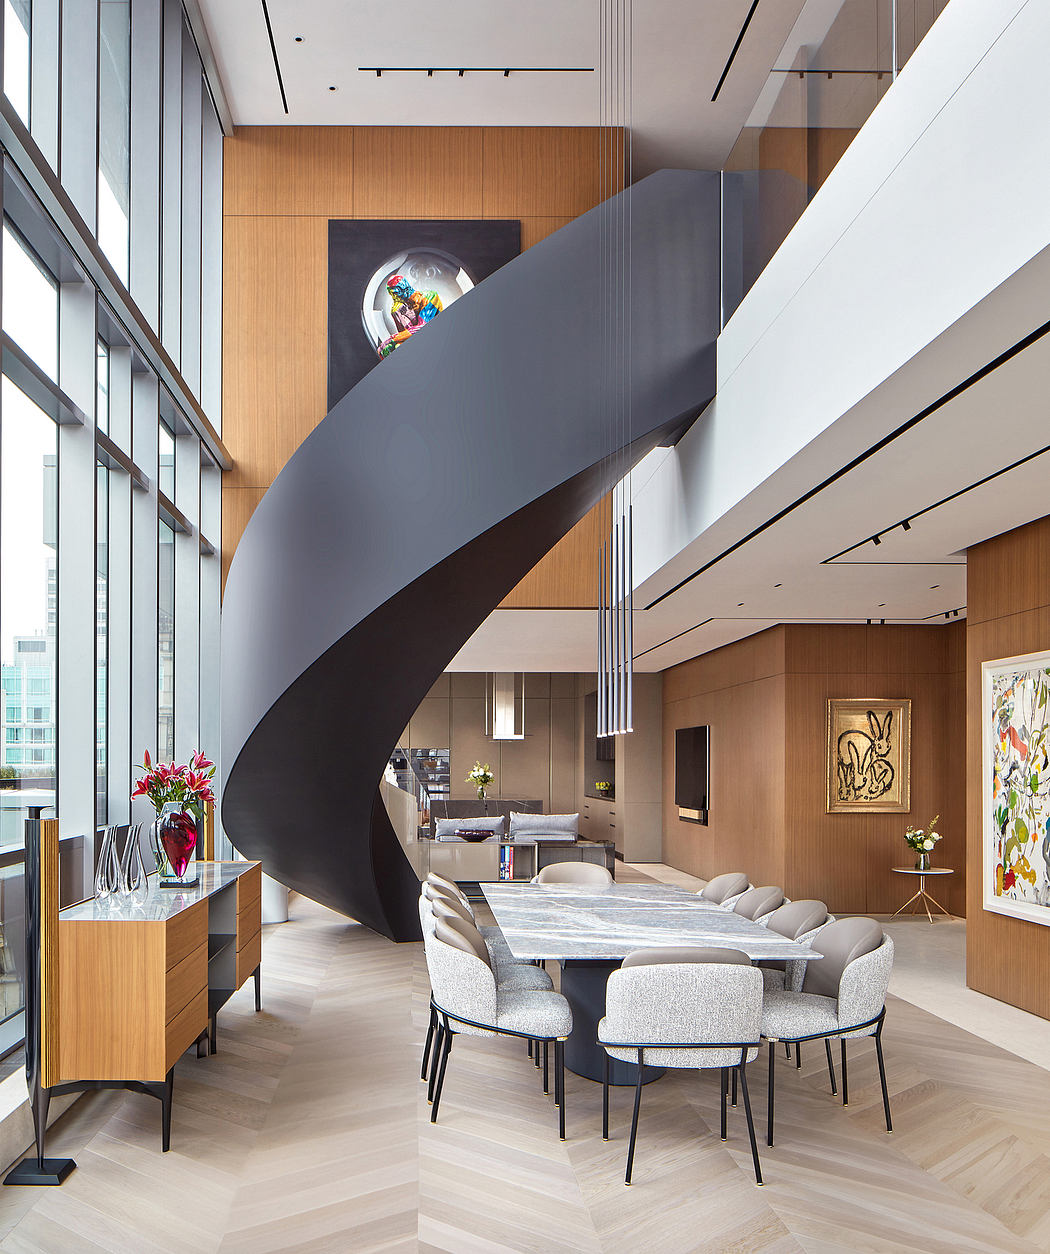 Sleek, modern dining room with curving staircase, wood paneling, and abstract artwork.